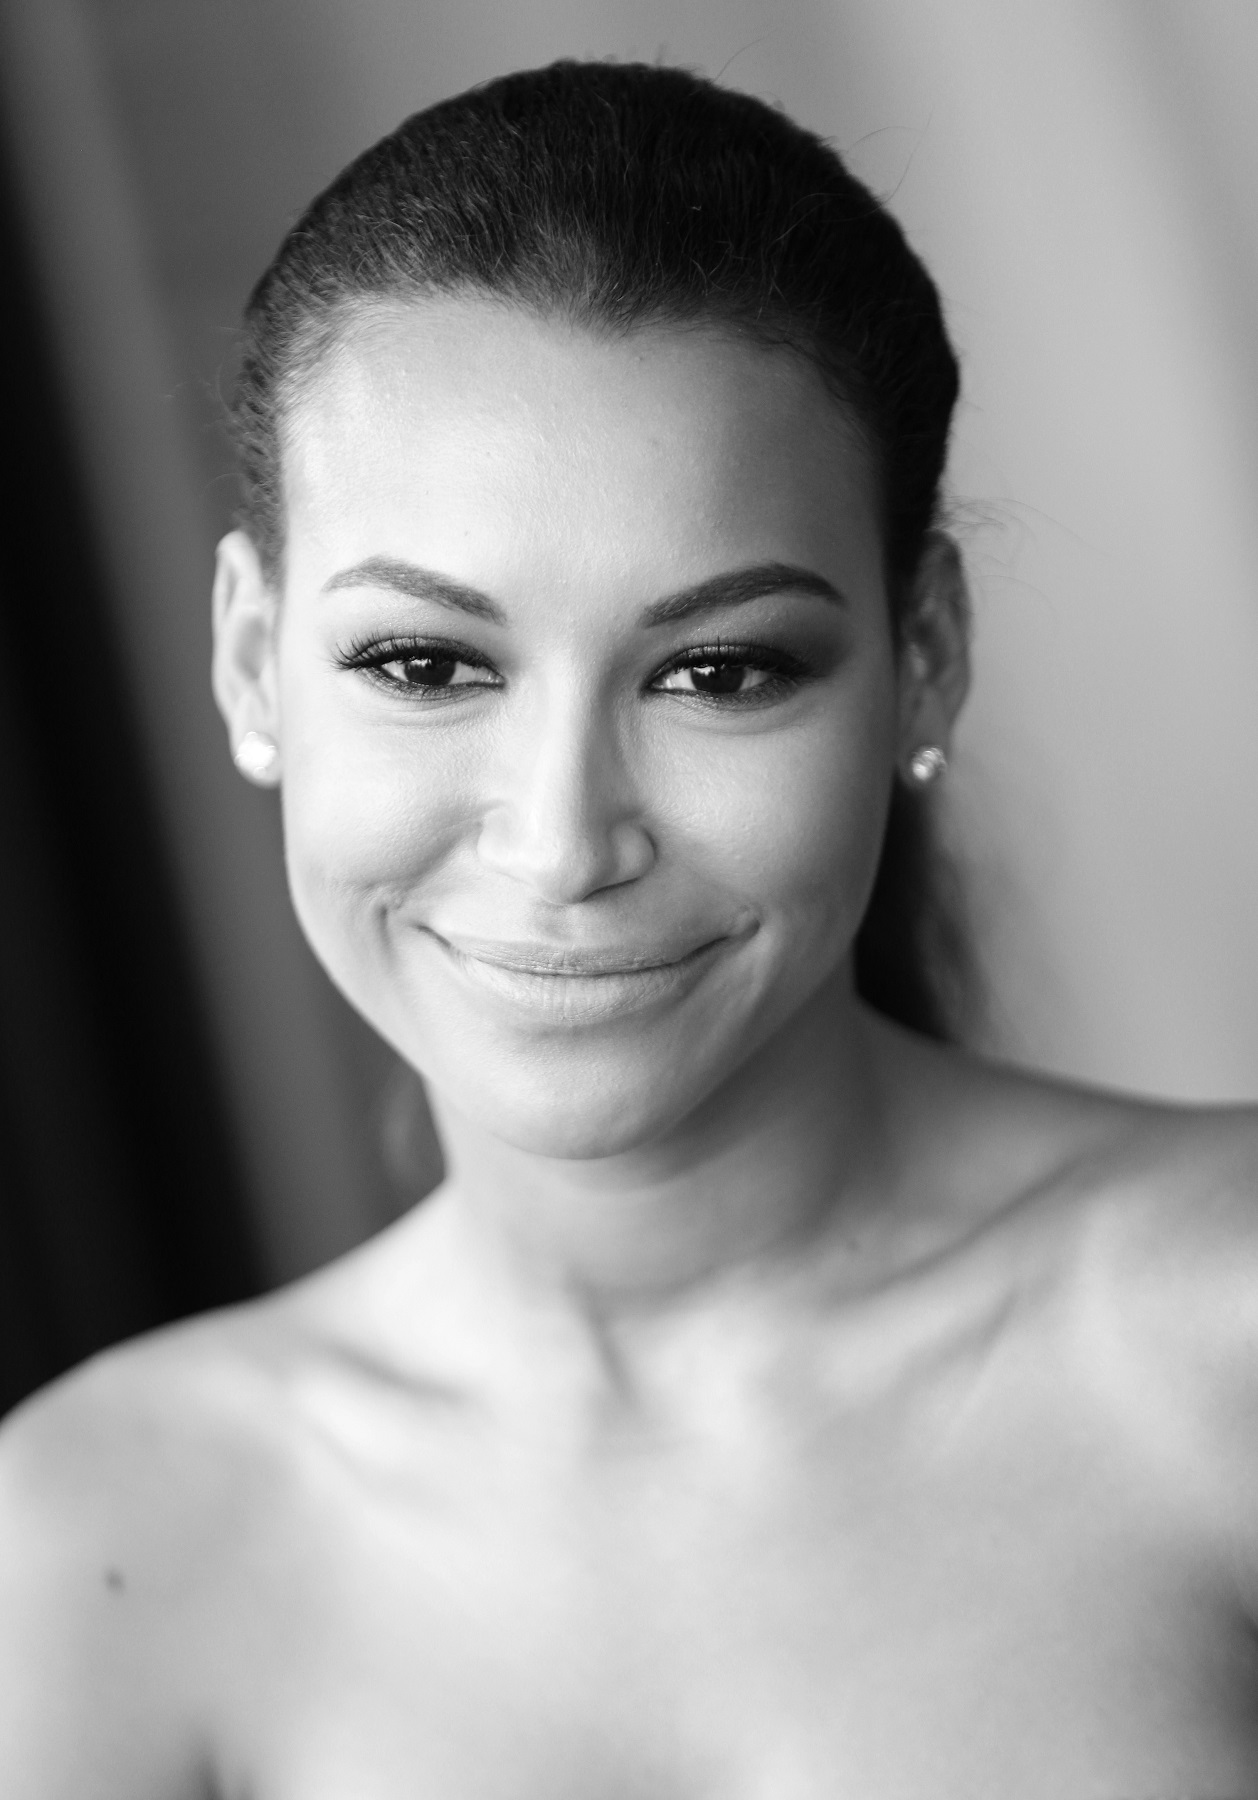 GIFFONI VALLE PIANA, ITALY - JULY 24:  (EXCLUSIVE COVERAGE) (EDITORS NOTE: This image has been converted to black and white) Actress Naya Rivera poses for a portrait session at the 2013 Giffoni Film Festival on July 24, 2013 in Giffoni Valle Piana, Italy.  (Photo by Vittorio Zunino Celotto/Getty Images)